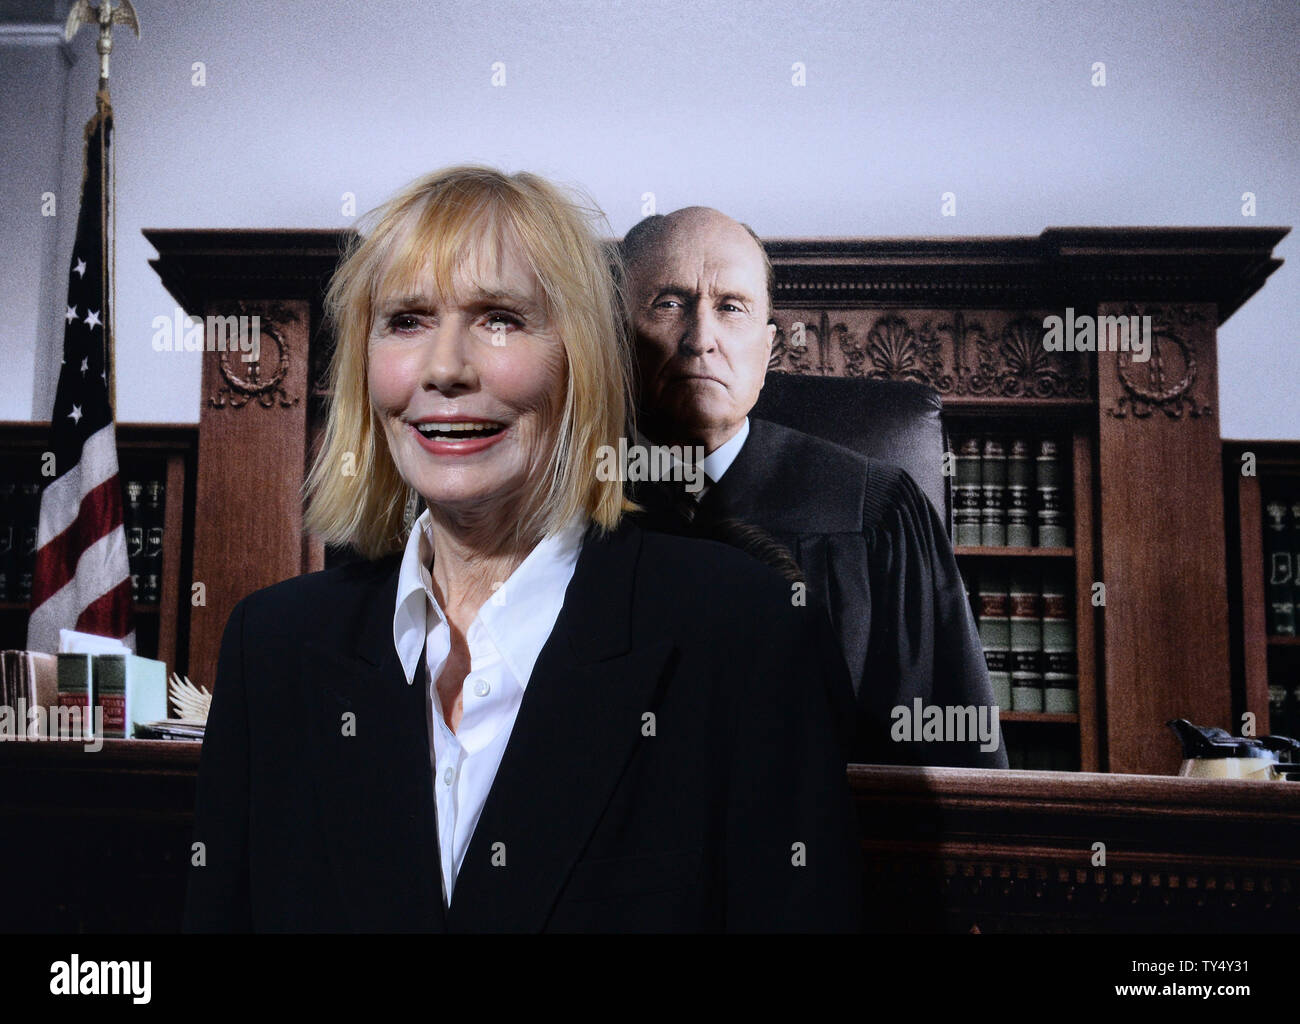 Actress Sally Kellerman attends the premiere of the motion picture drama 'The Judge' at the Academy of Motion Picture Arts & Sciences in Beverly Hills, California on October 1, 2014. Storyline: Big city lawyer Hank Palmer (Robert Downey Jr.) returns to his childhood home where his father (Robert Duvall), the town's judge, is suspected of murder. Hank sets out to discover the truth and, along the way, reconnects with his estranged family. UPI/Jim Ruymen Stock Photo